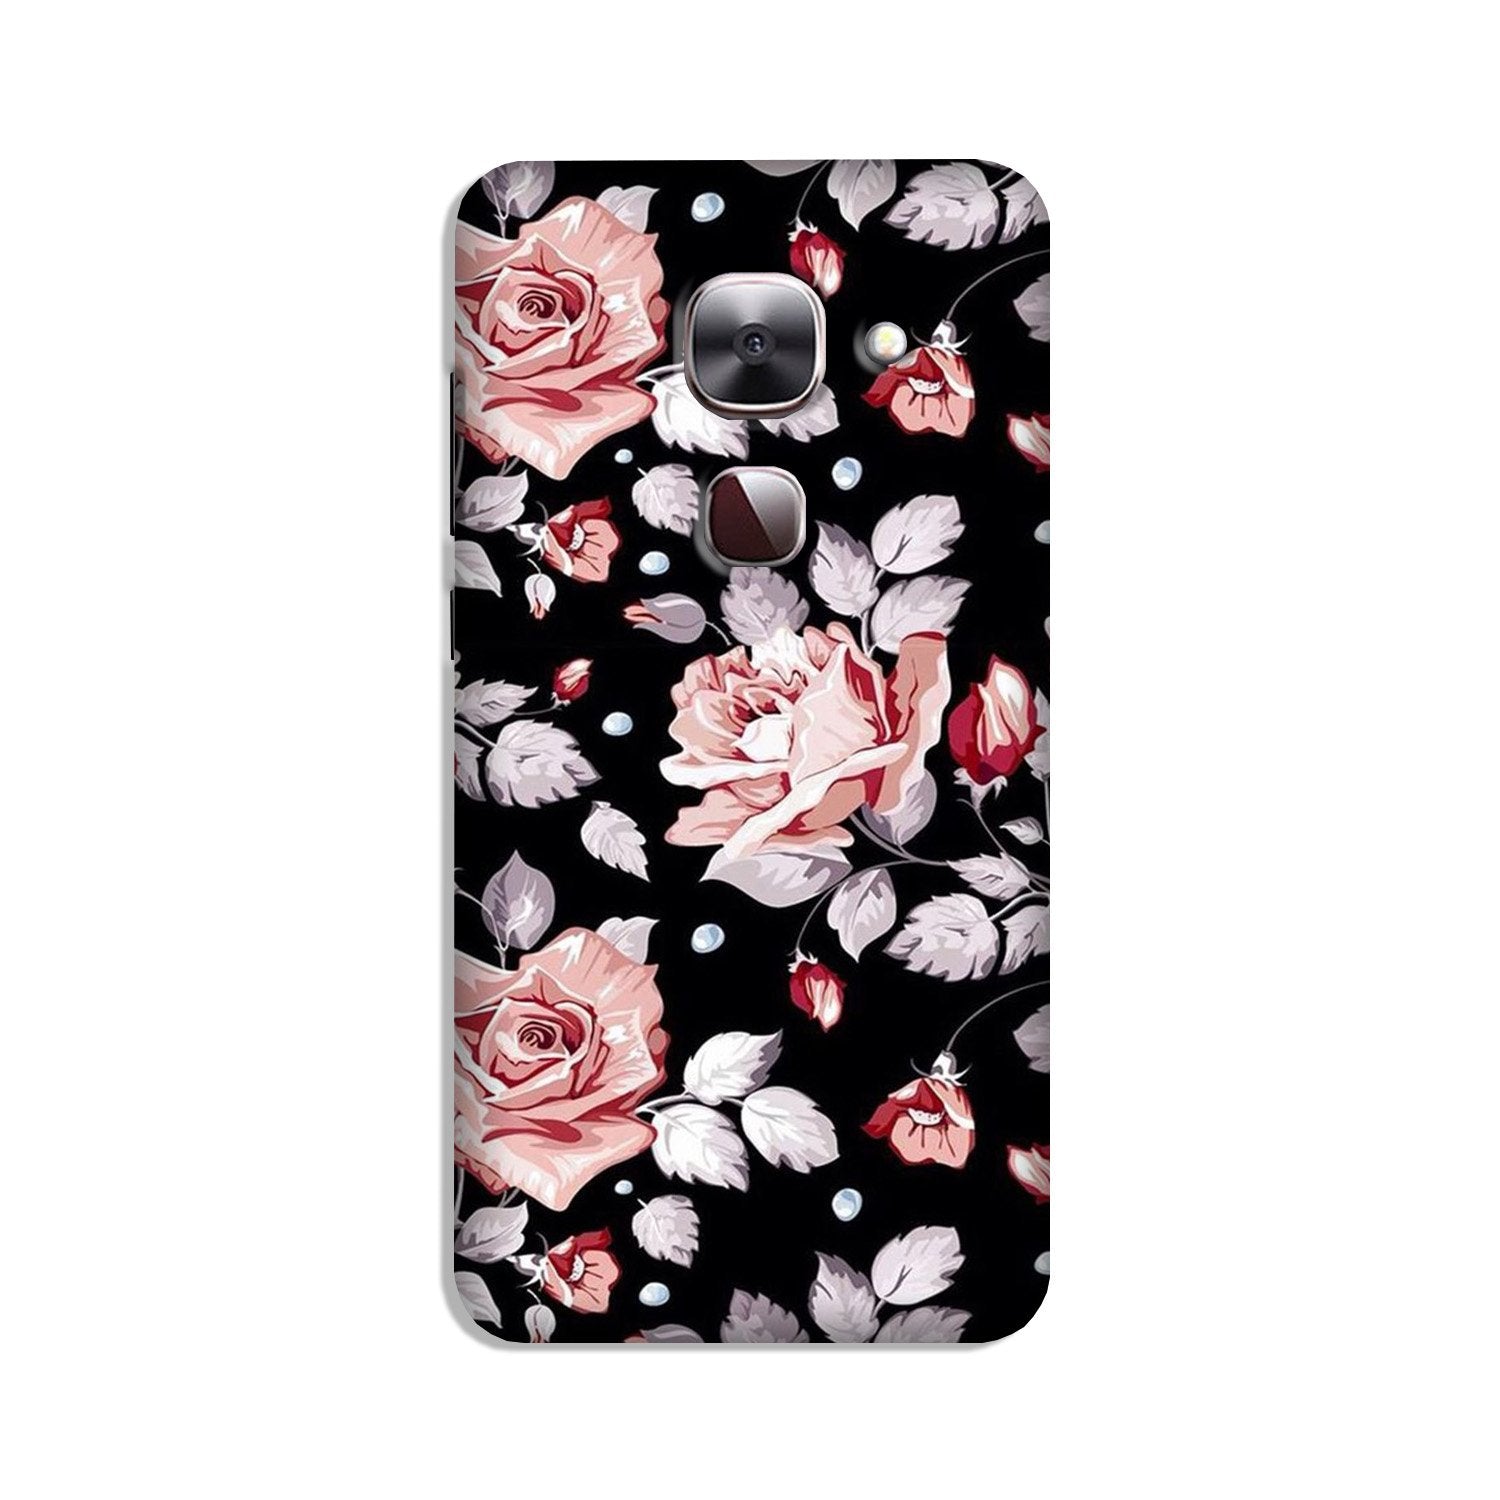 Pink rose Case for LeEco le 2s